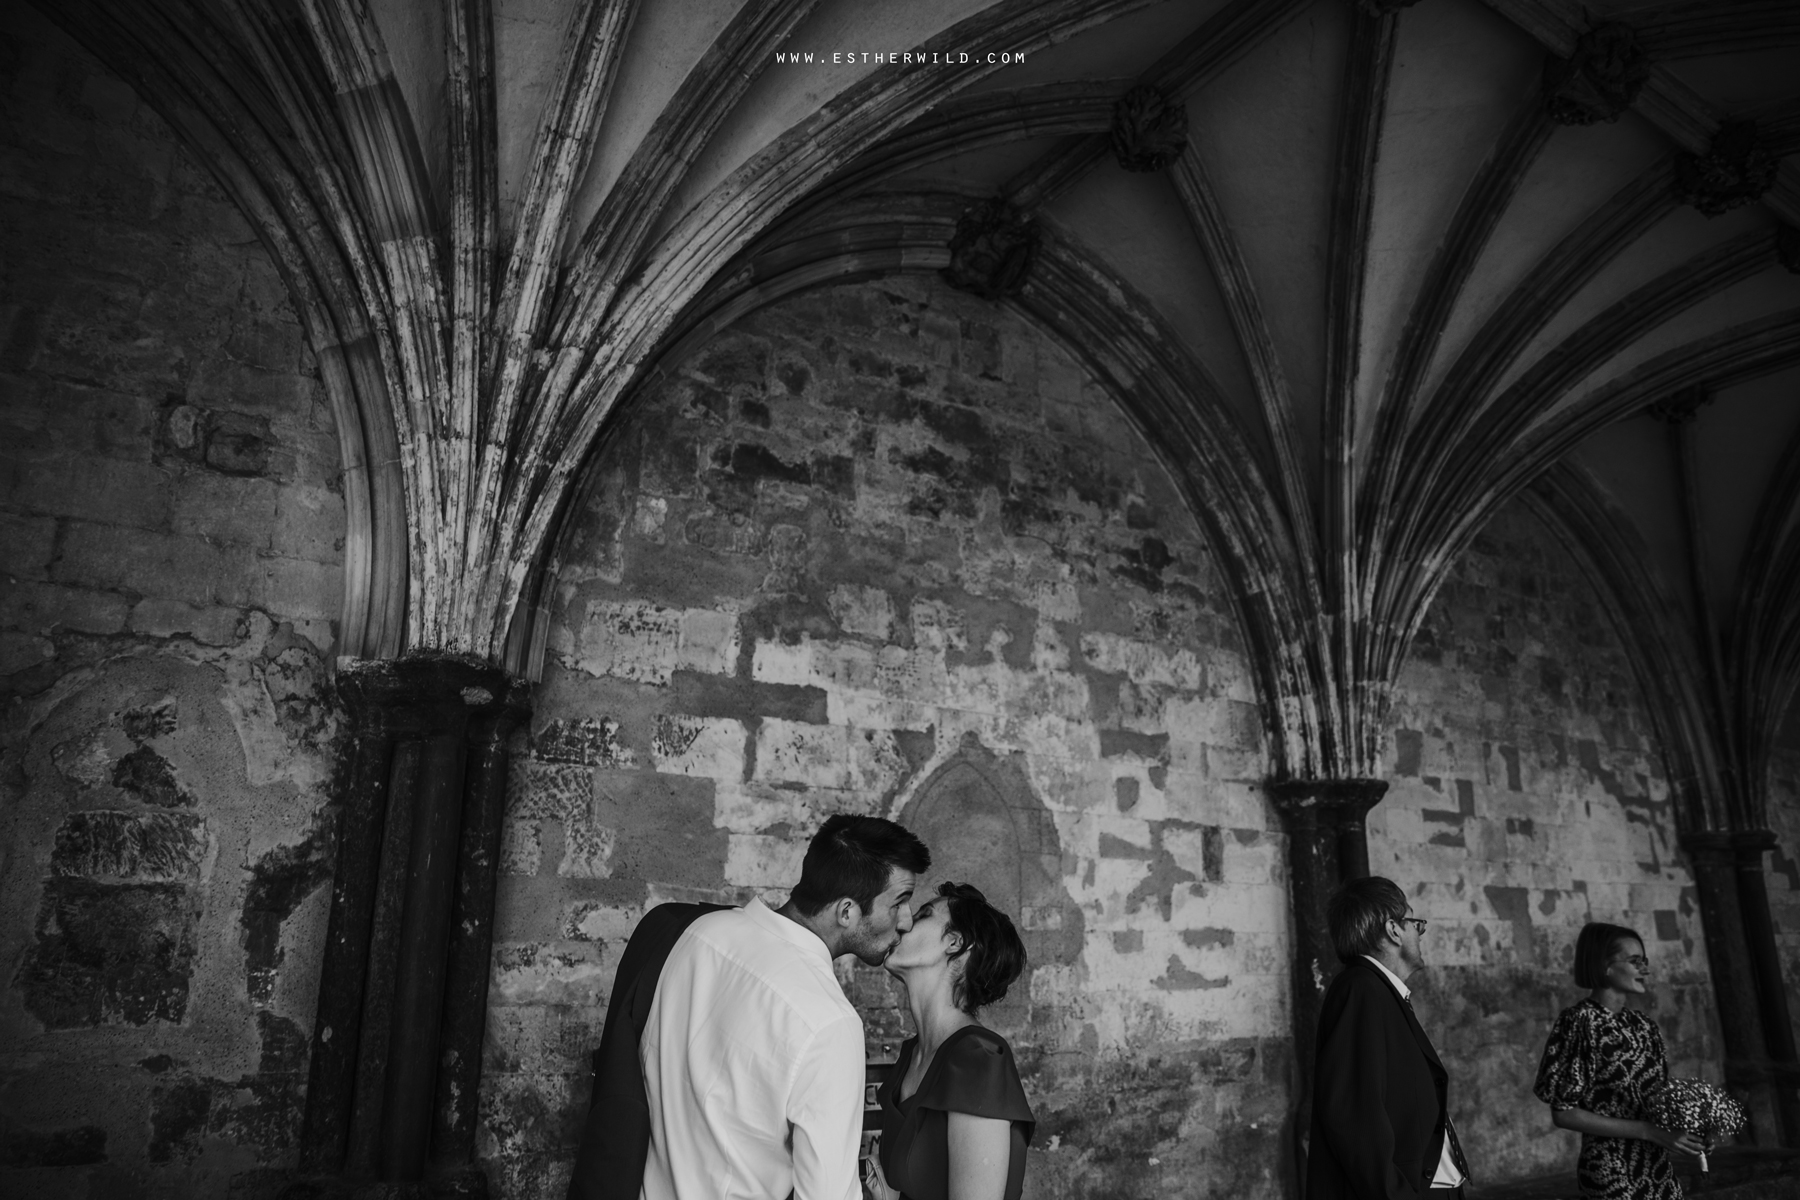 Norwich_Castle_Arcade_Grosvenor_Chip_Birdcage_Cathedral_Cloisters_Refectory_Wedding_Photography_Esther_Wild_Photographer_Norfolk_Kings_Lynn_3R8A1833.jpg